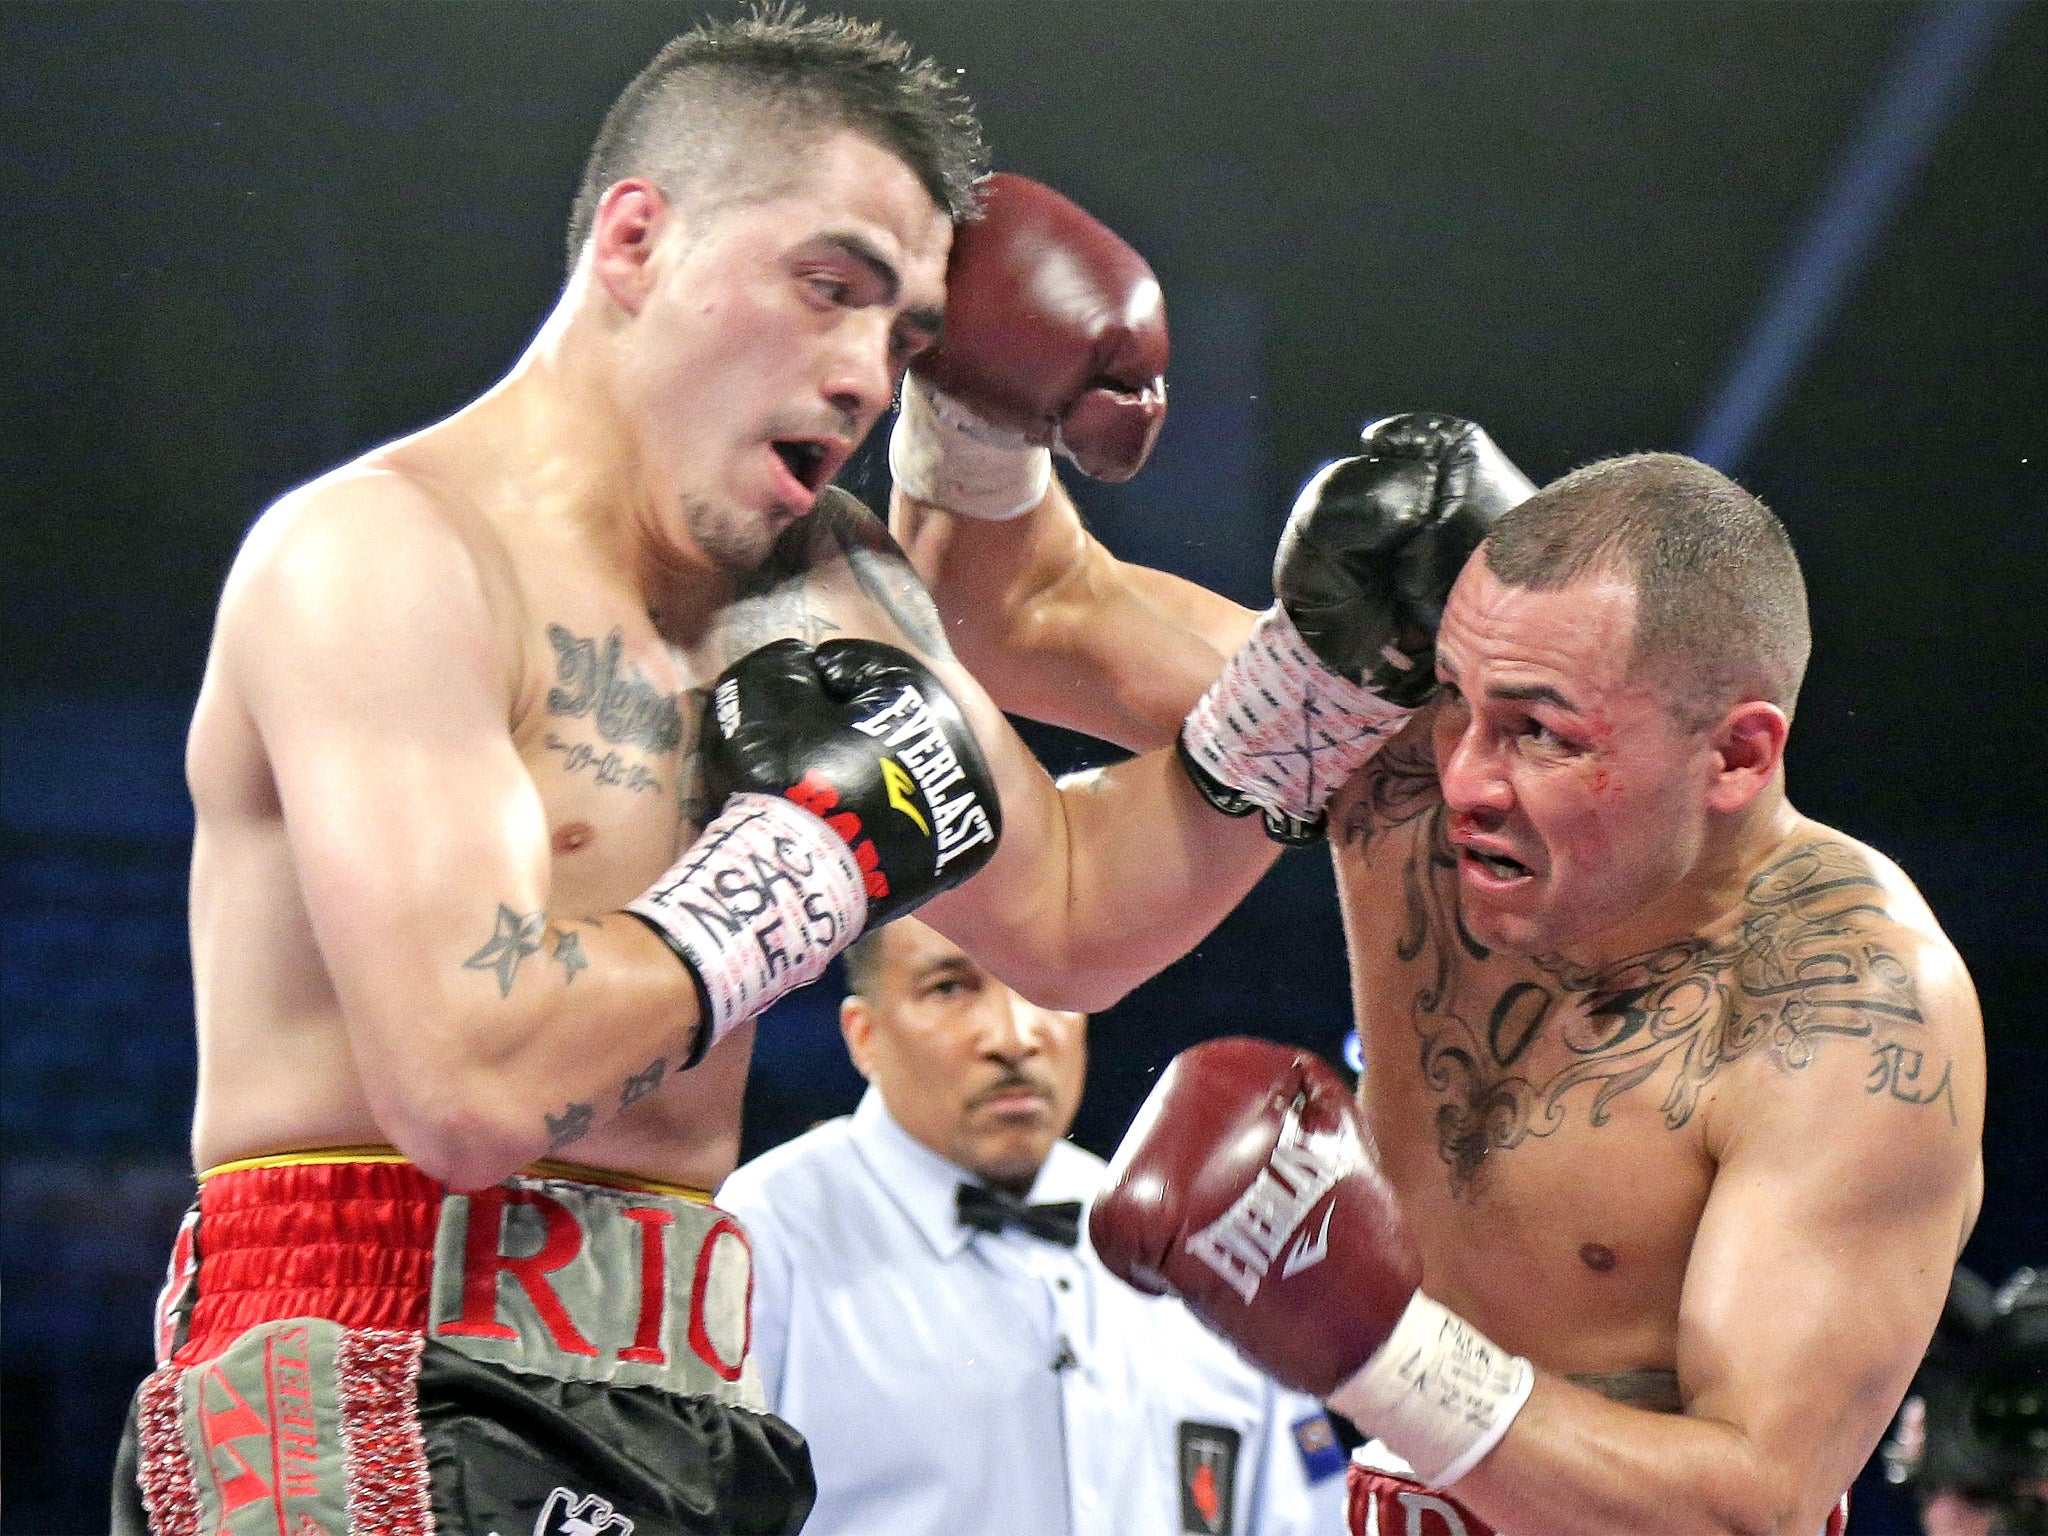 Mike Alvarado (right) exchanges punches with Brandon Rios during their 'slugfest' of a rematch in Las Vegas in 2013